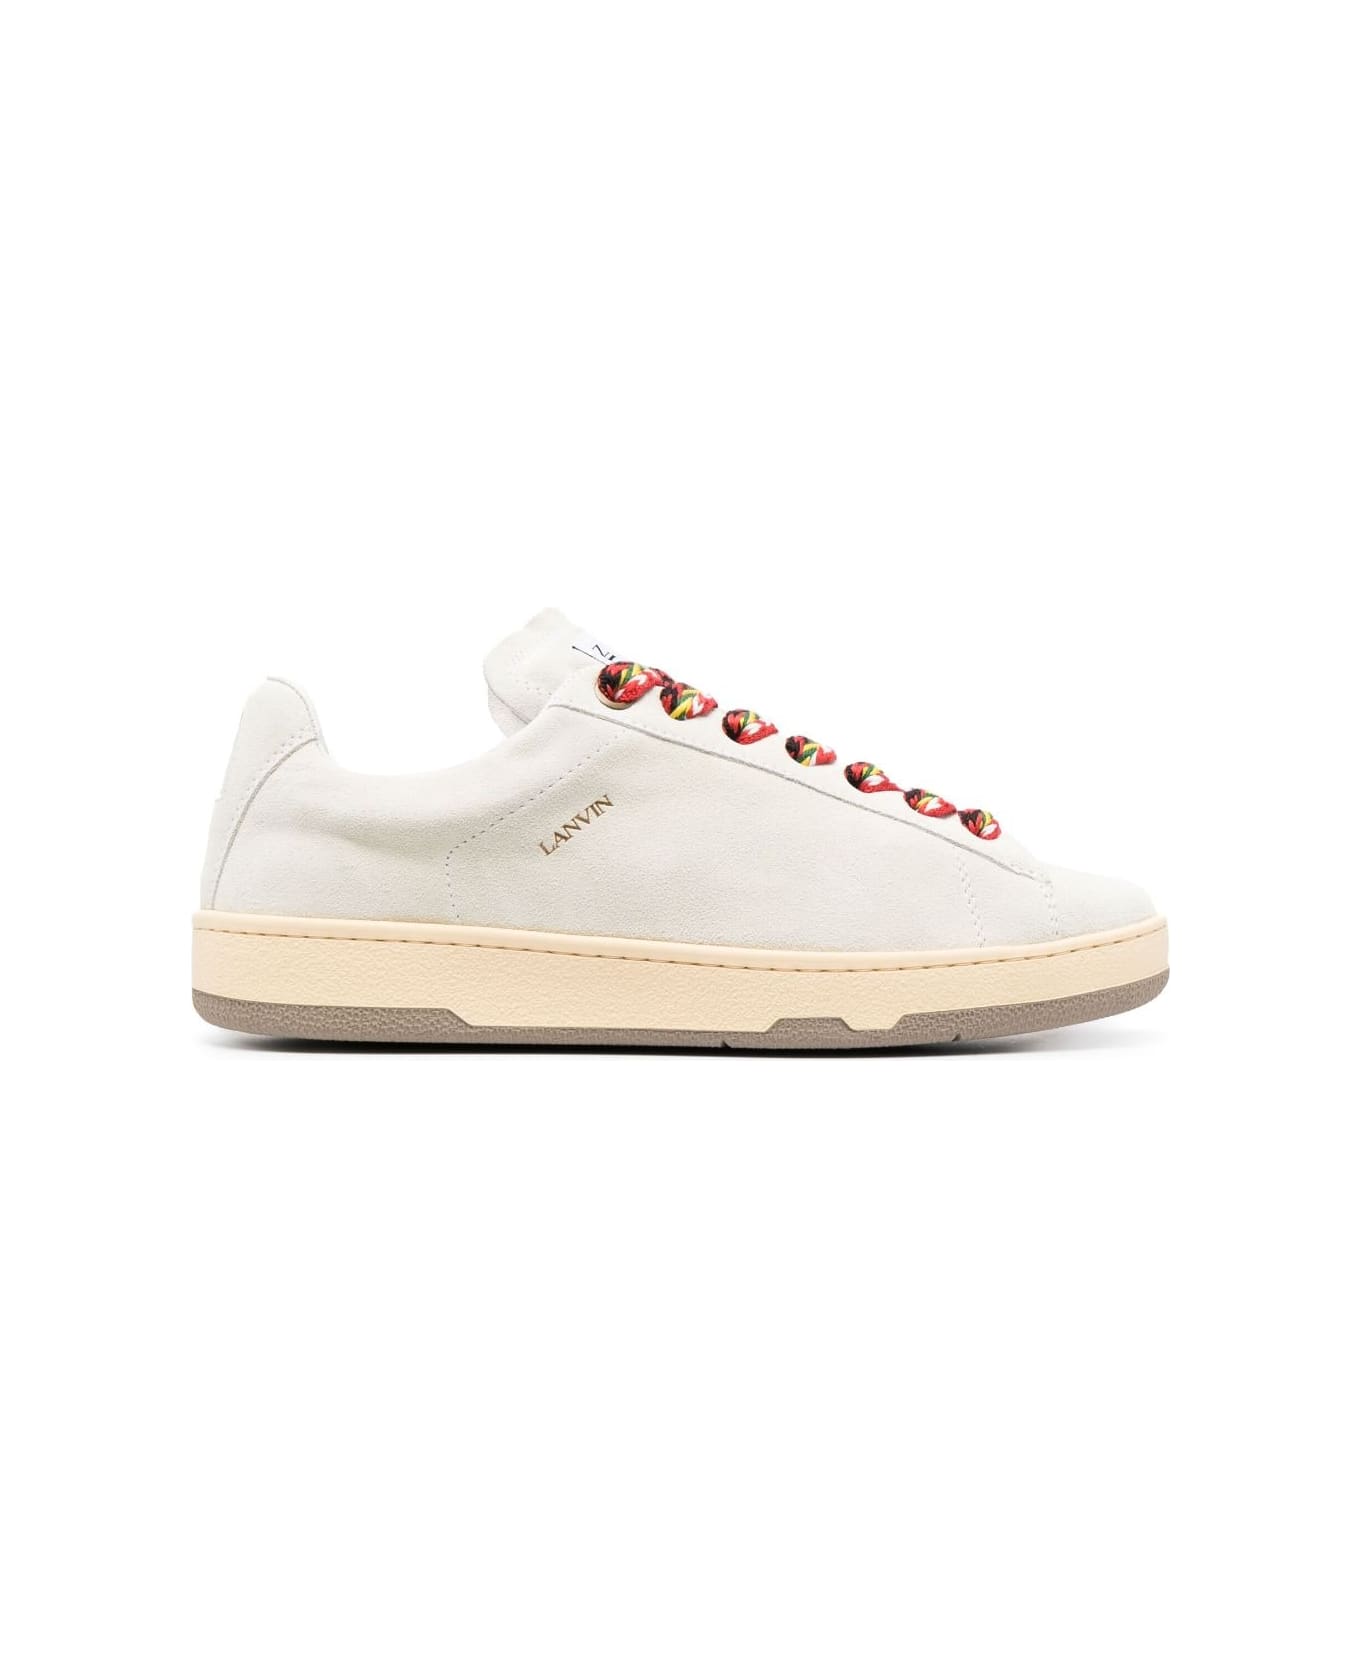 Lanvin Lite Curb Low Top Sneakers - White スニーカー